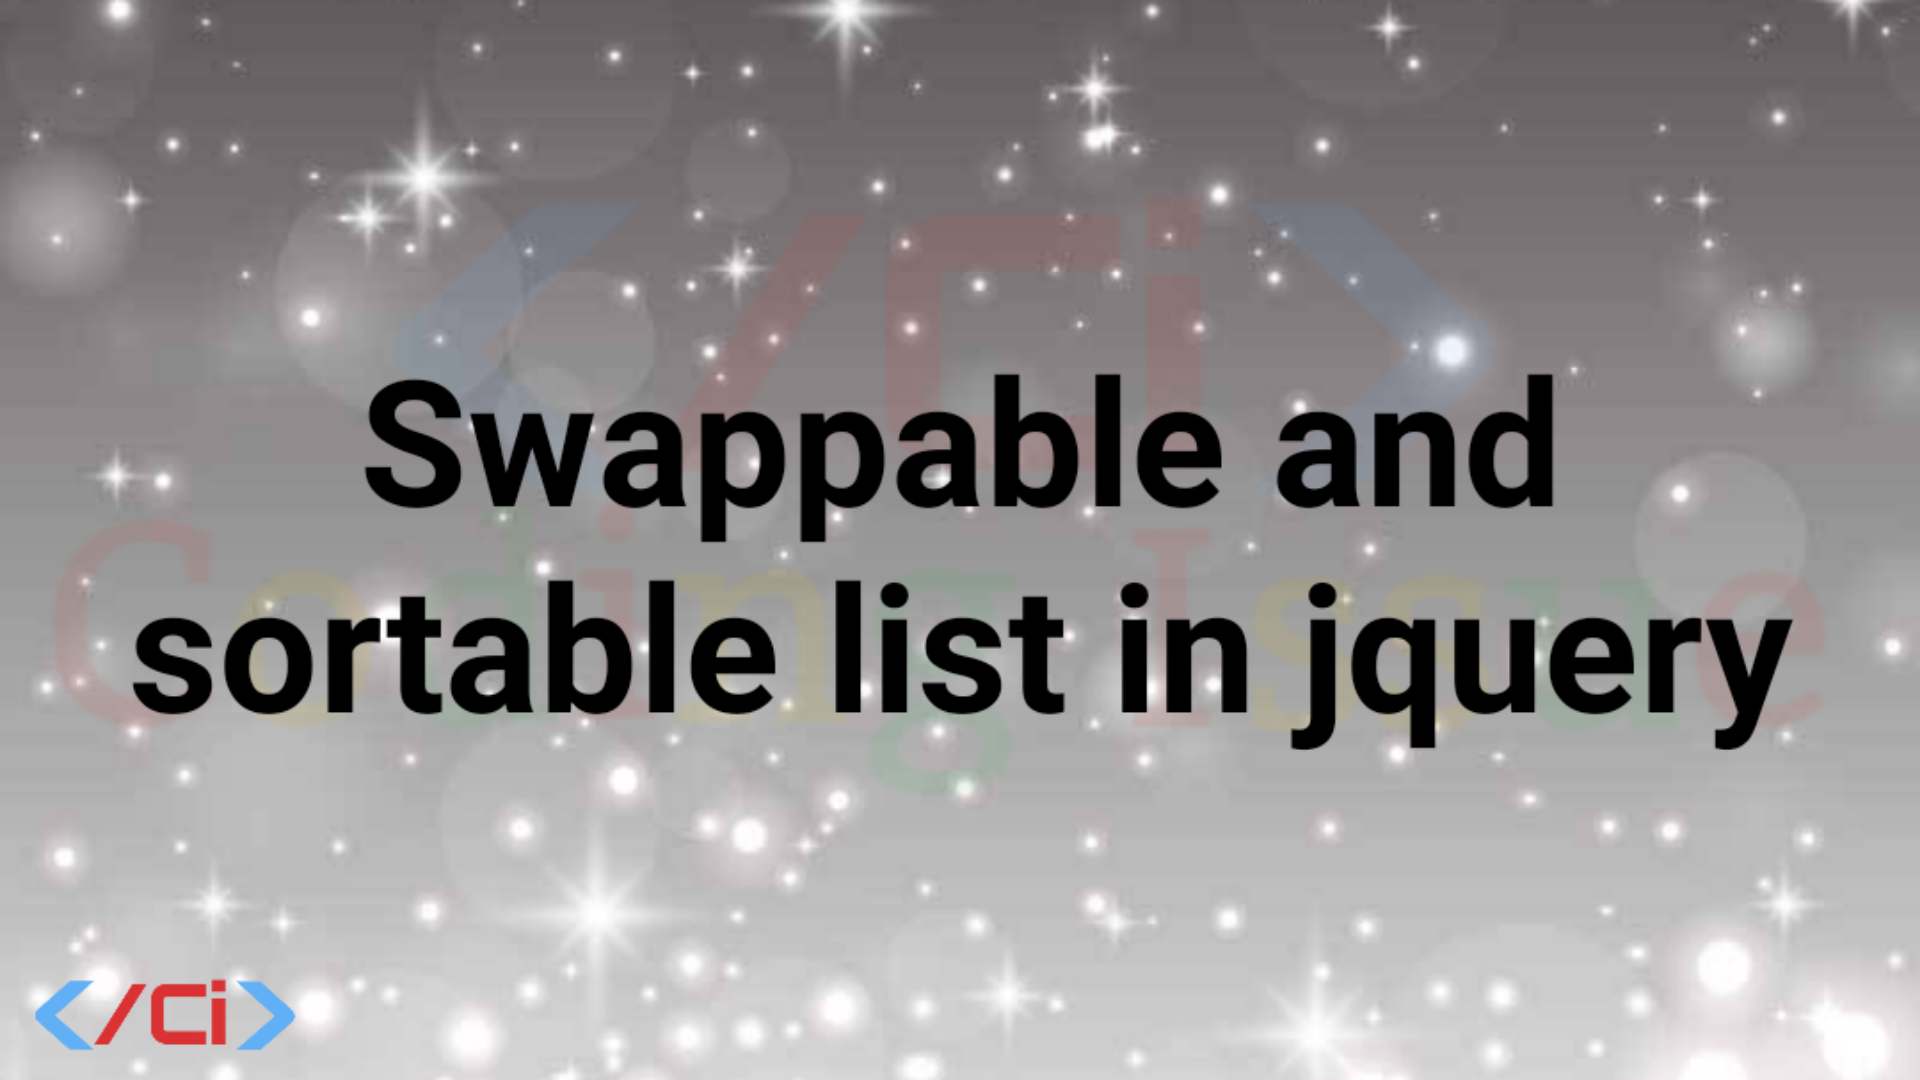 Swappable and sortable list in jquery